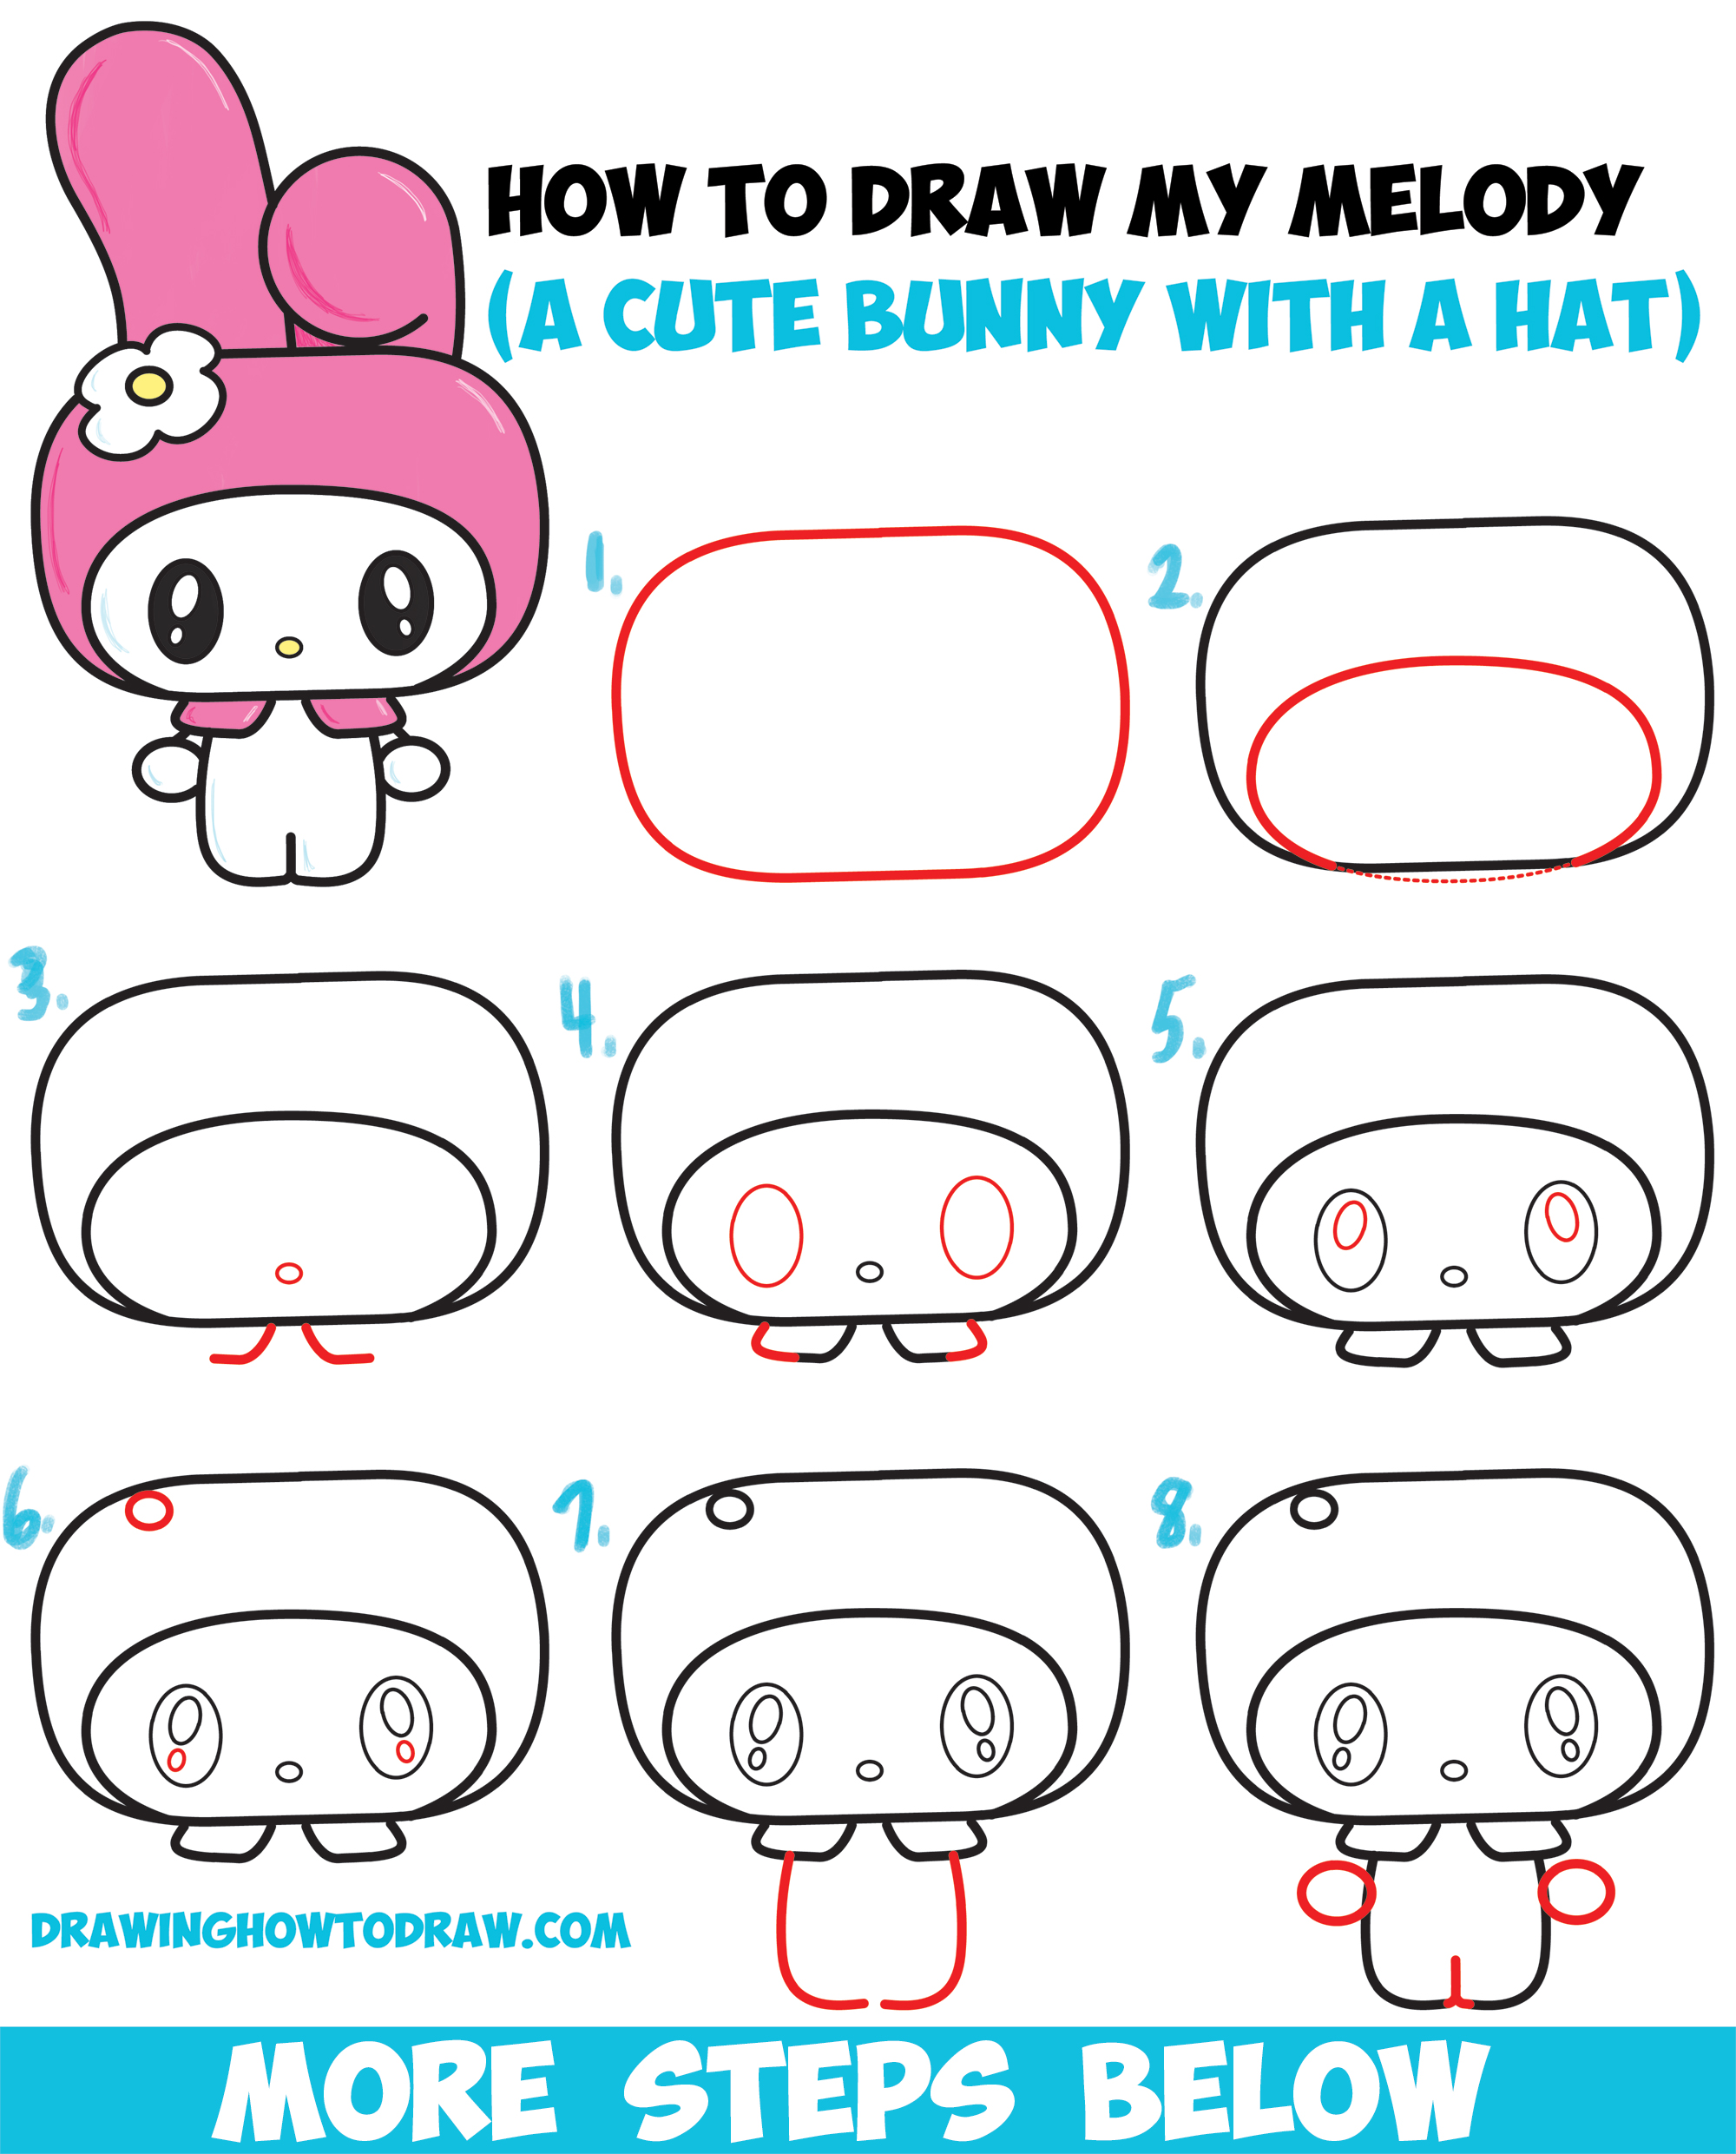 How to Draw Kawaii / Chibi My Melody from Hello Kitty A Cute Bunny